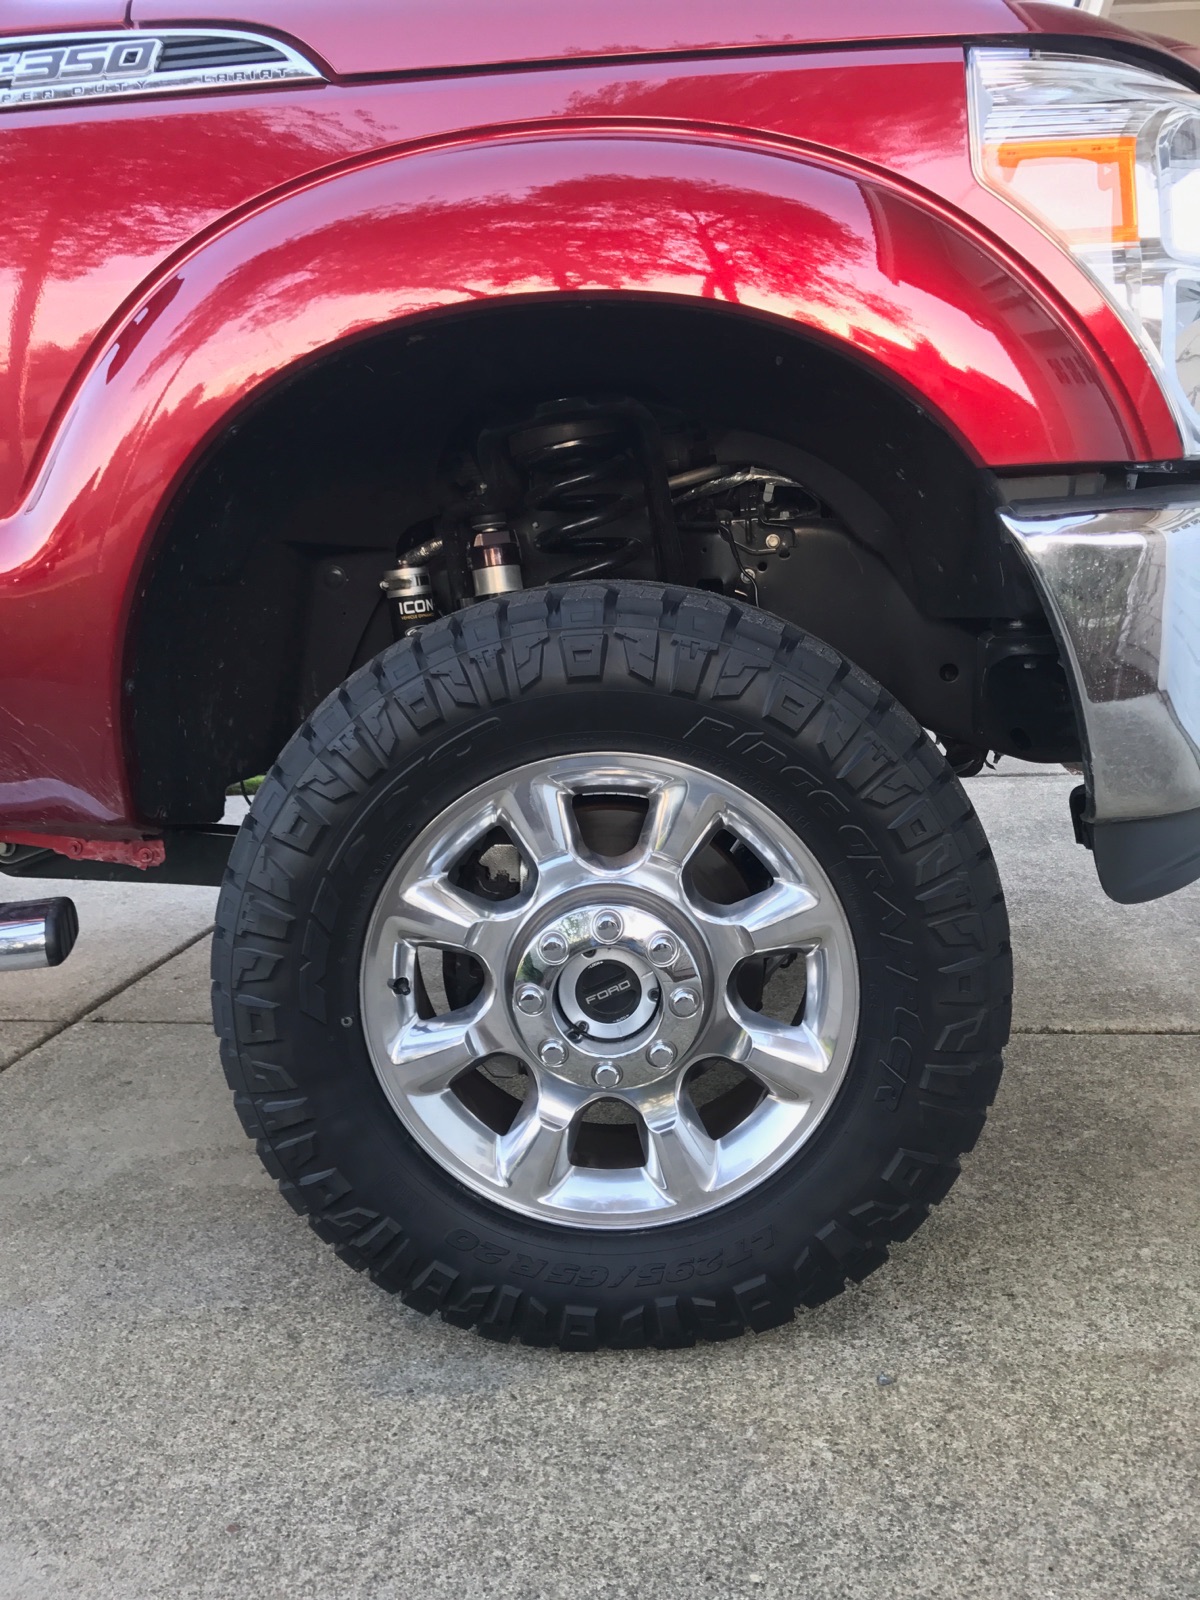 16 Superduty Needs Tires Wanna Go Plus Size Ford Truck Enthusiasts Forums